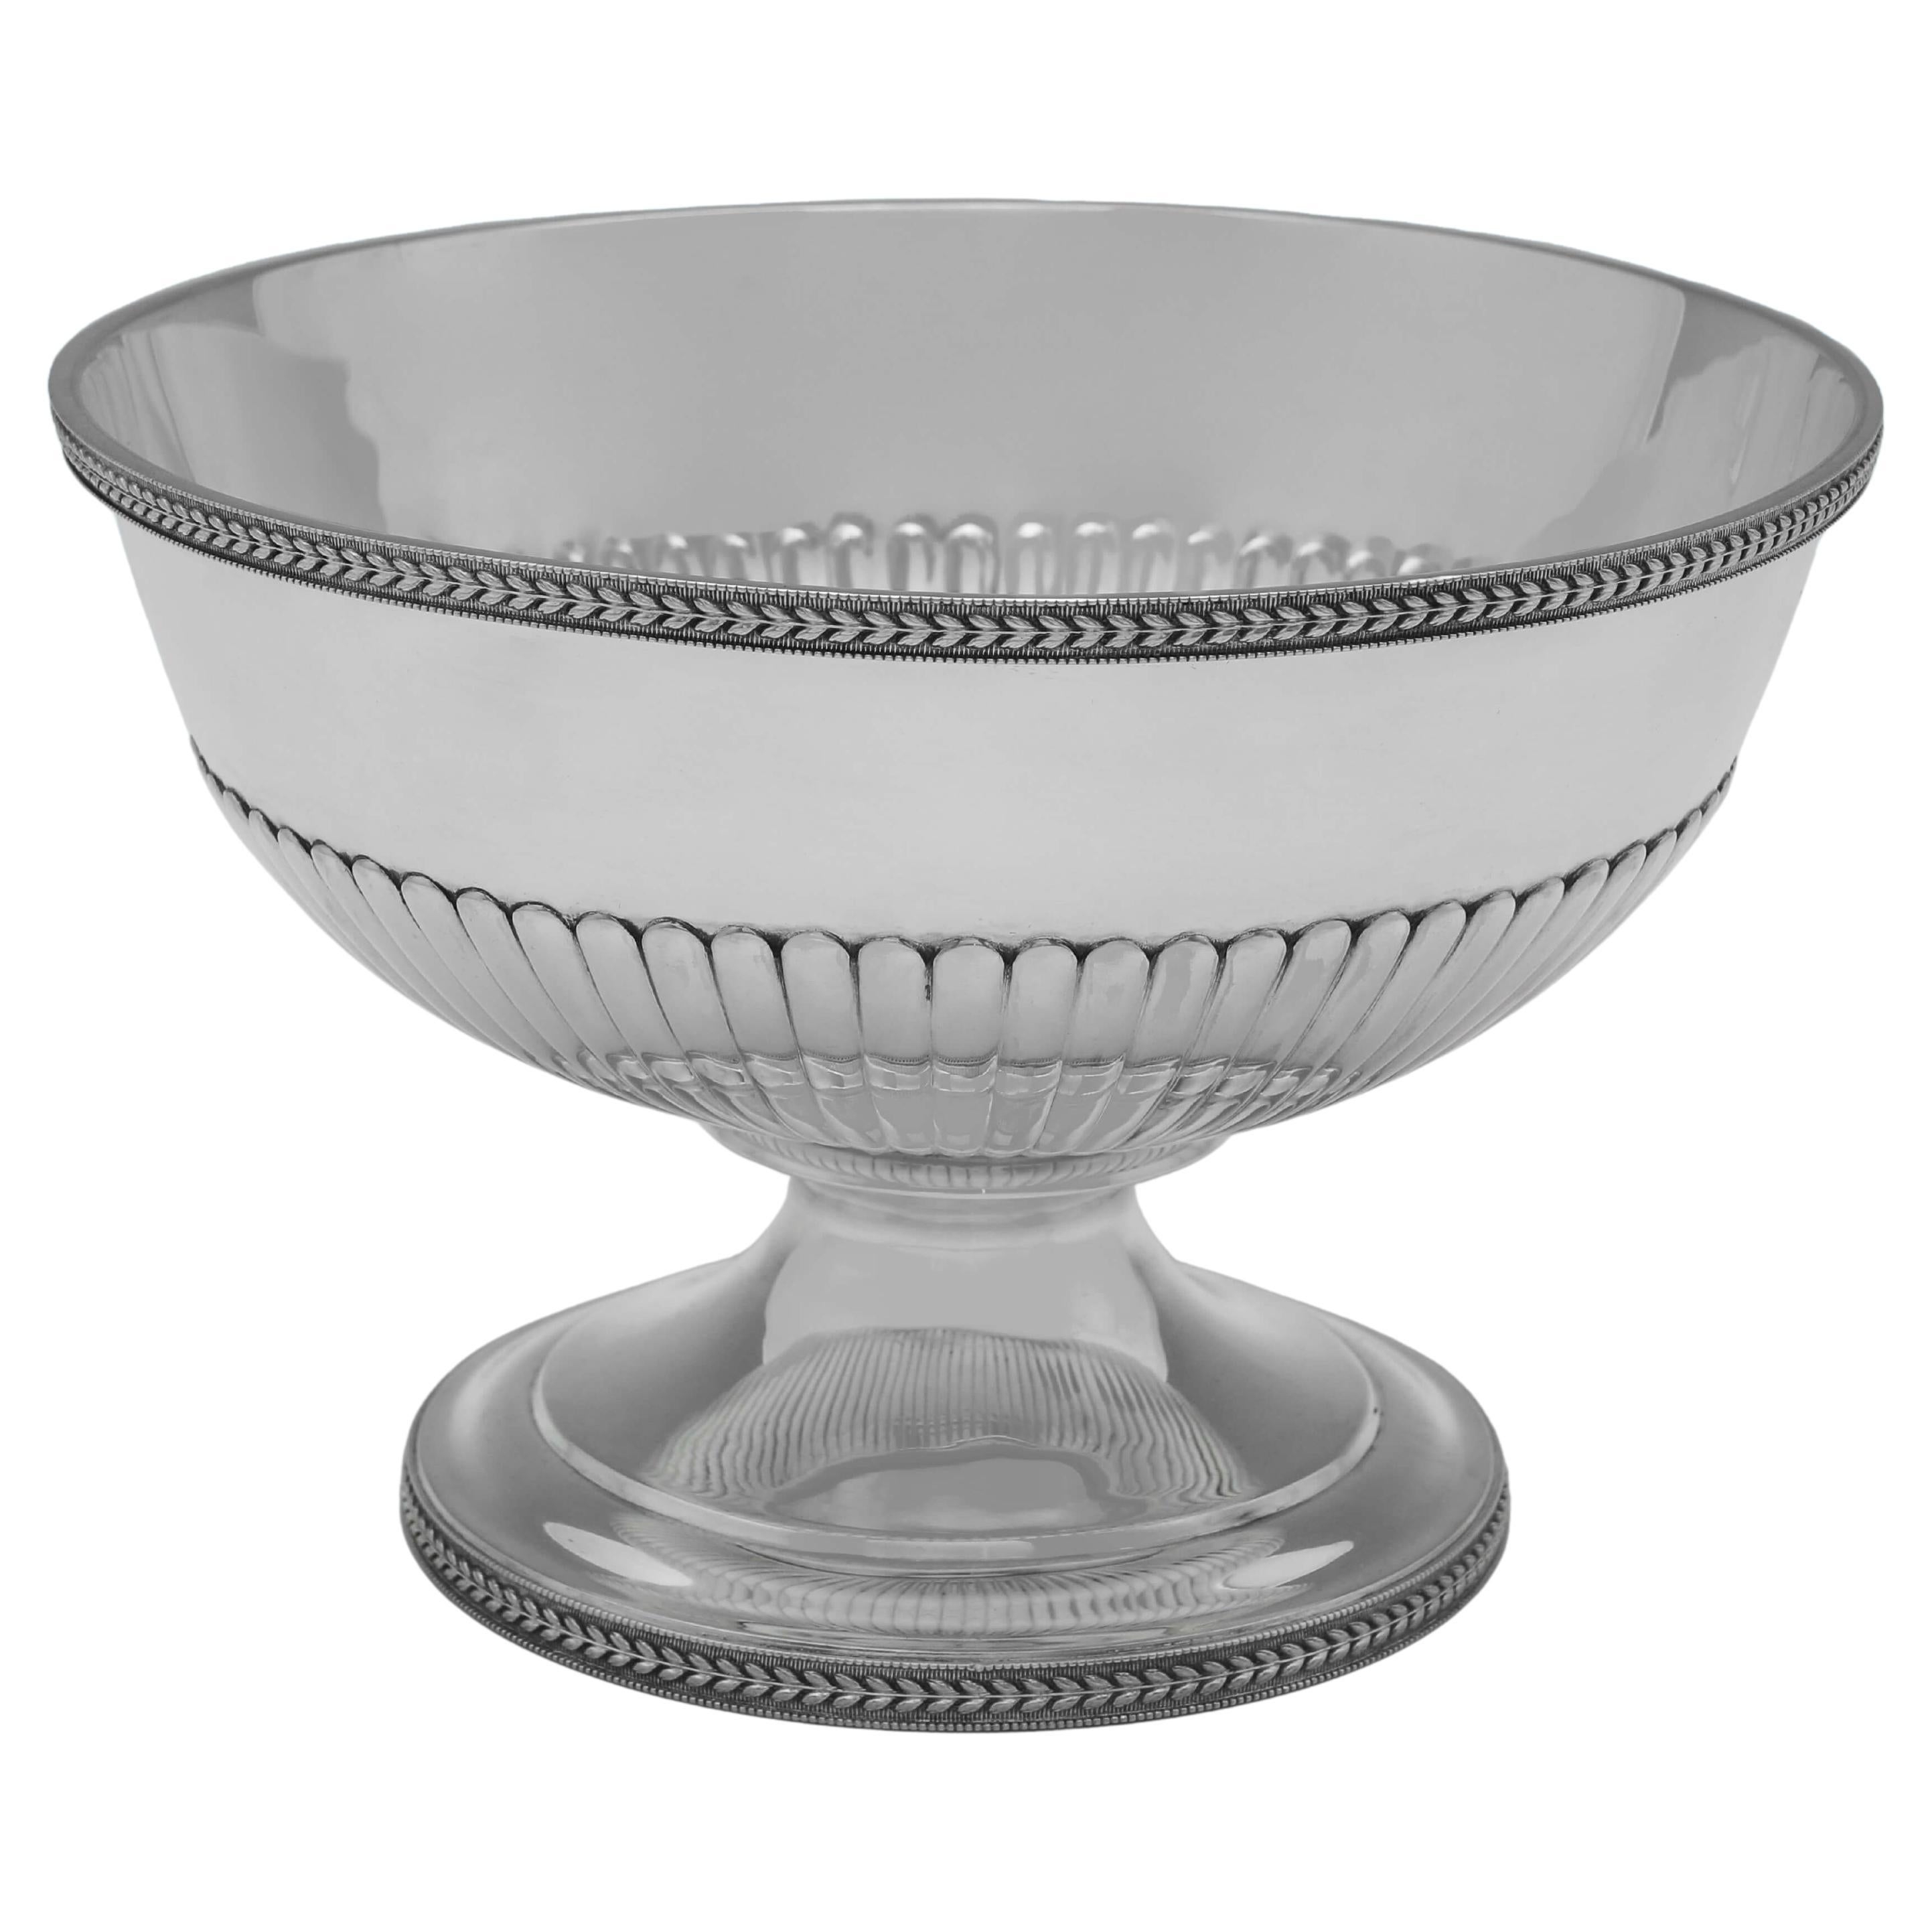 George III Period Sterling Silver Bowl - Made in 1803